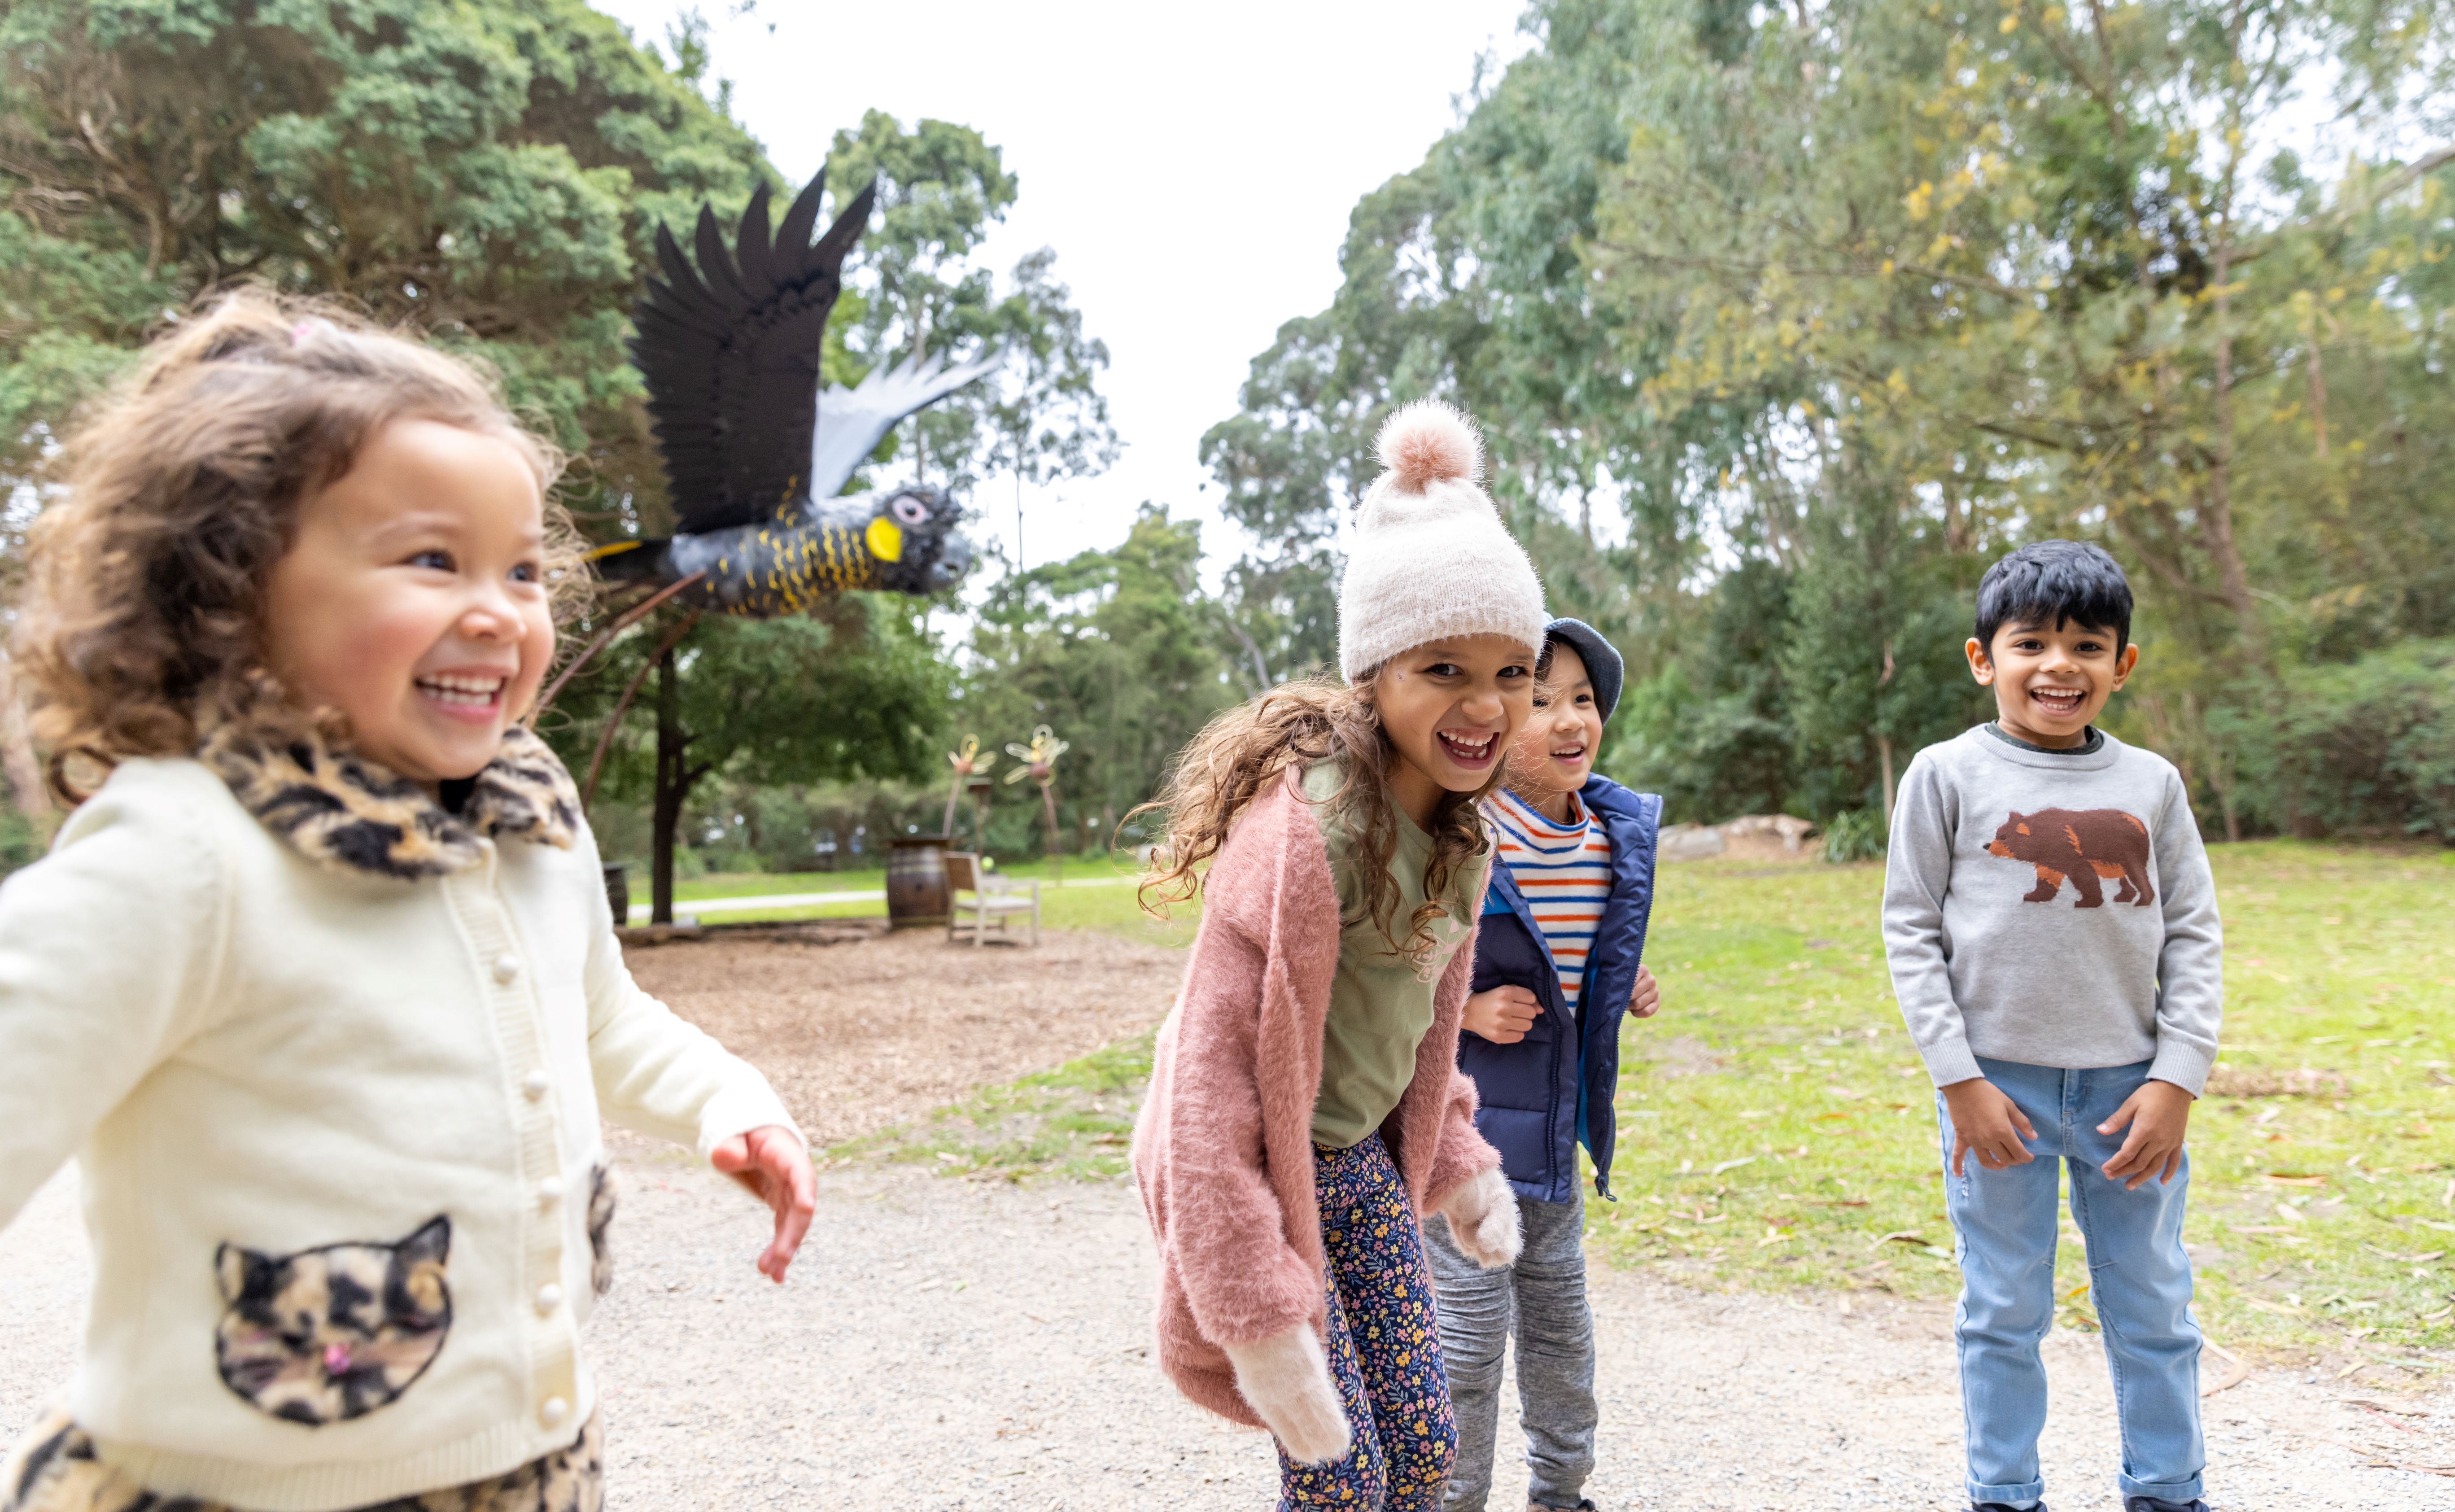 Four kids smiling with a giant Yellow-tailed Black Cockatoo at the back.